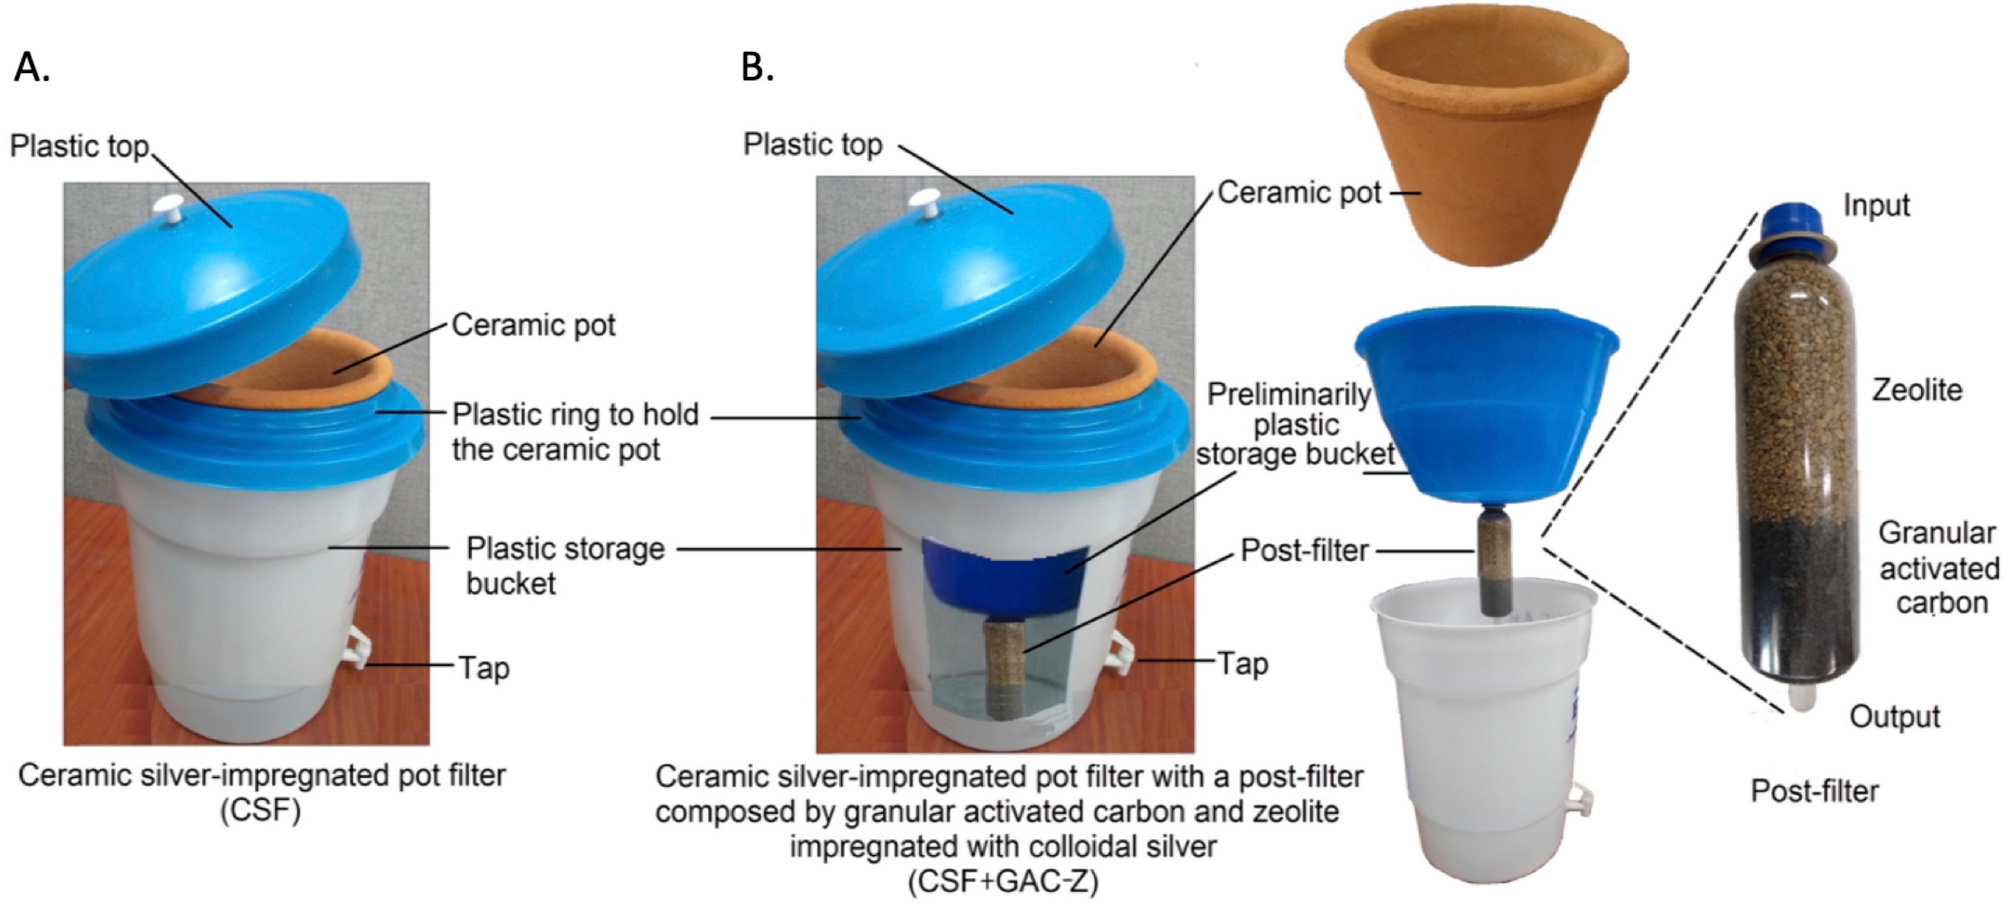 A novel filtration system based on ceramic silver-impregnated pot filter  combined with adsorption processes to remove waterborne bacteria |  Scientific Reports